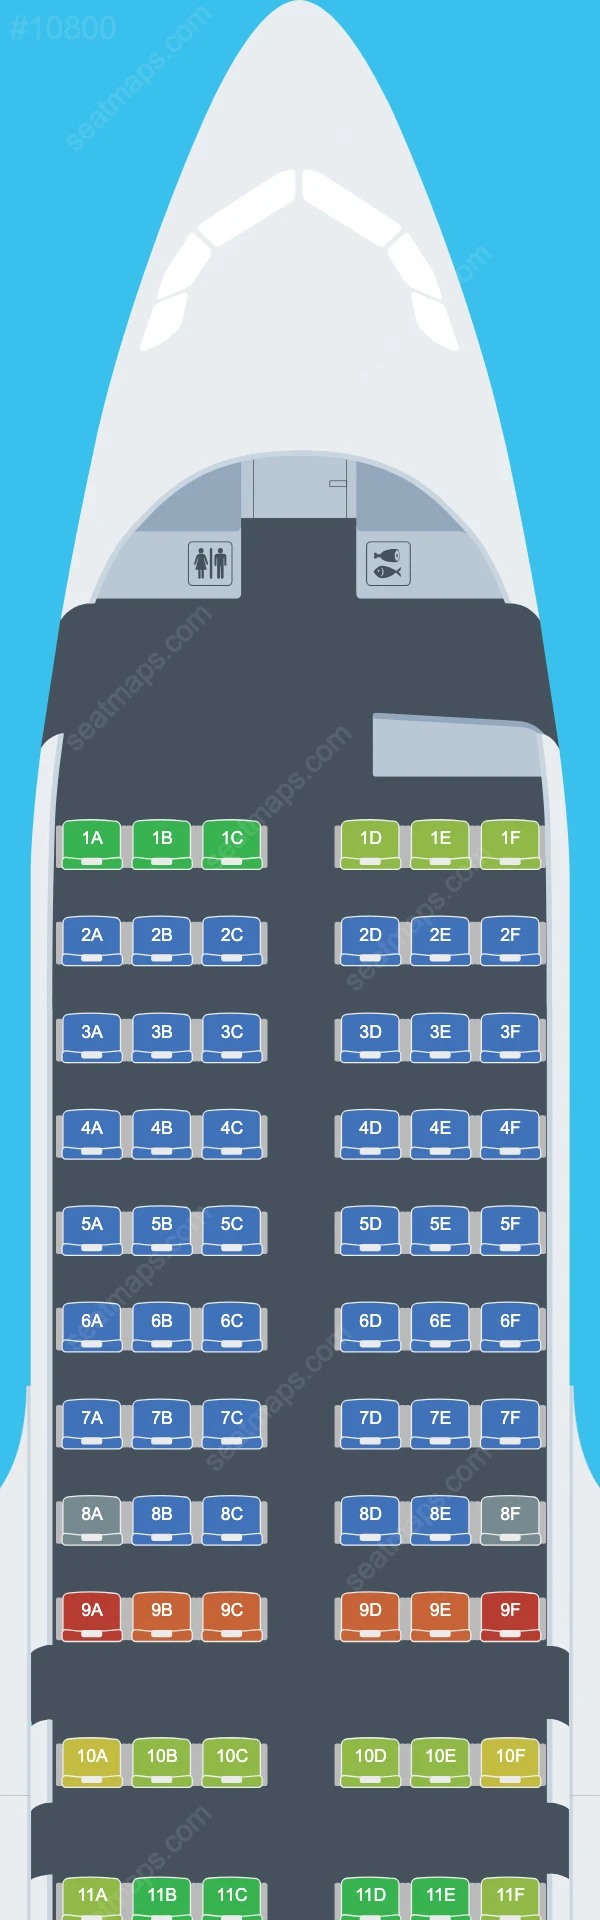 airBaltic Airbus A319 Seat Maps A319-100